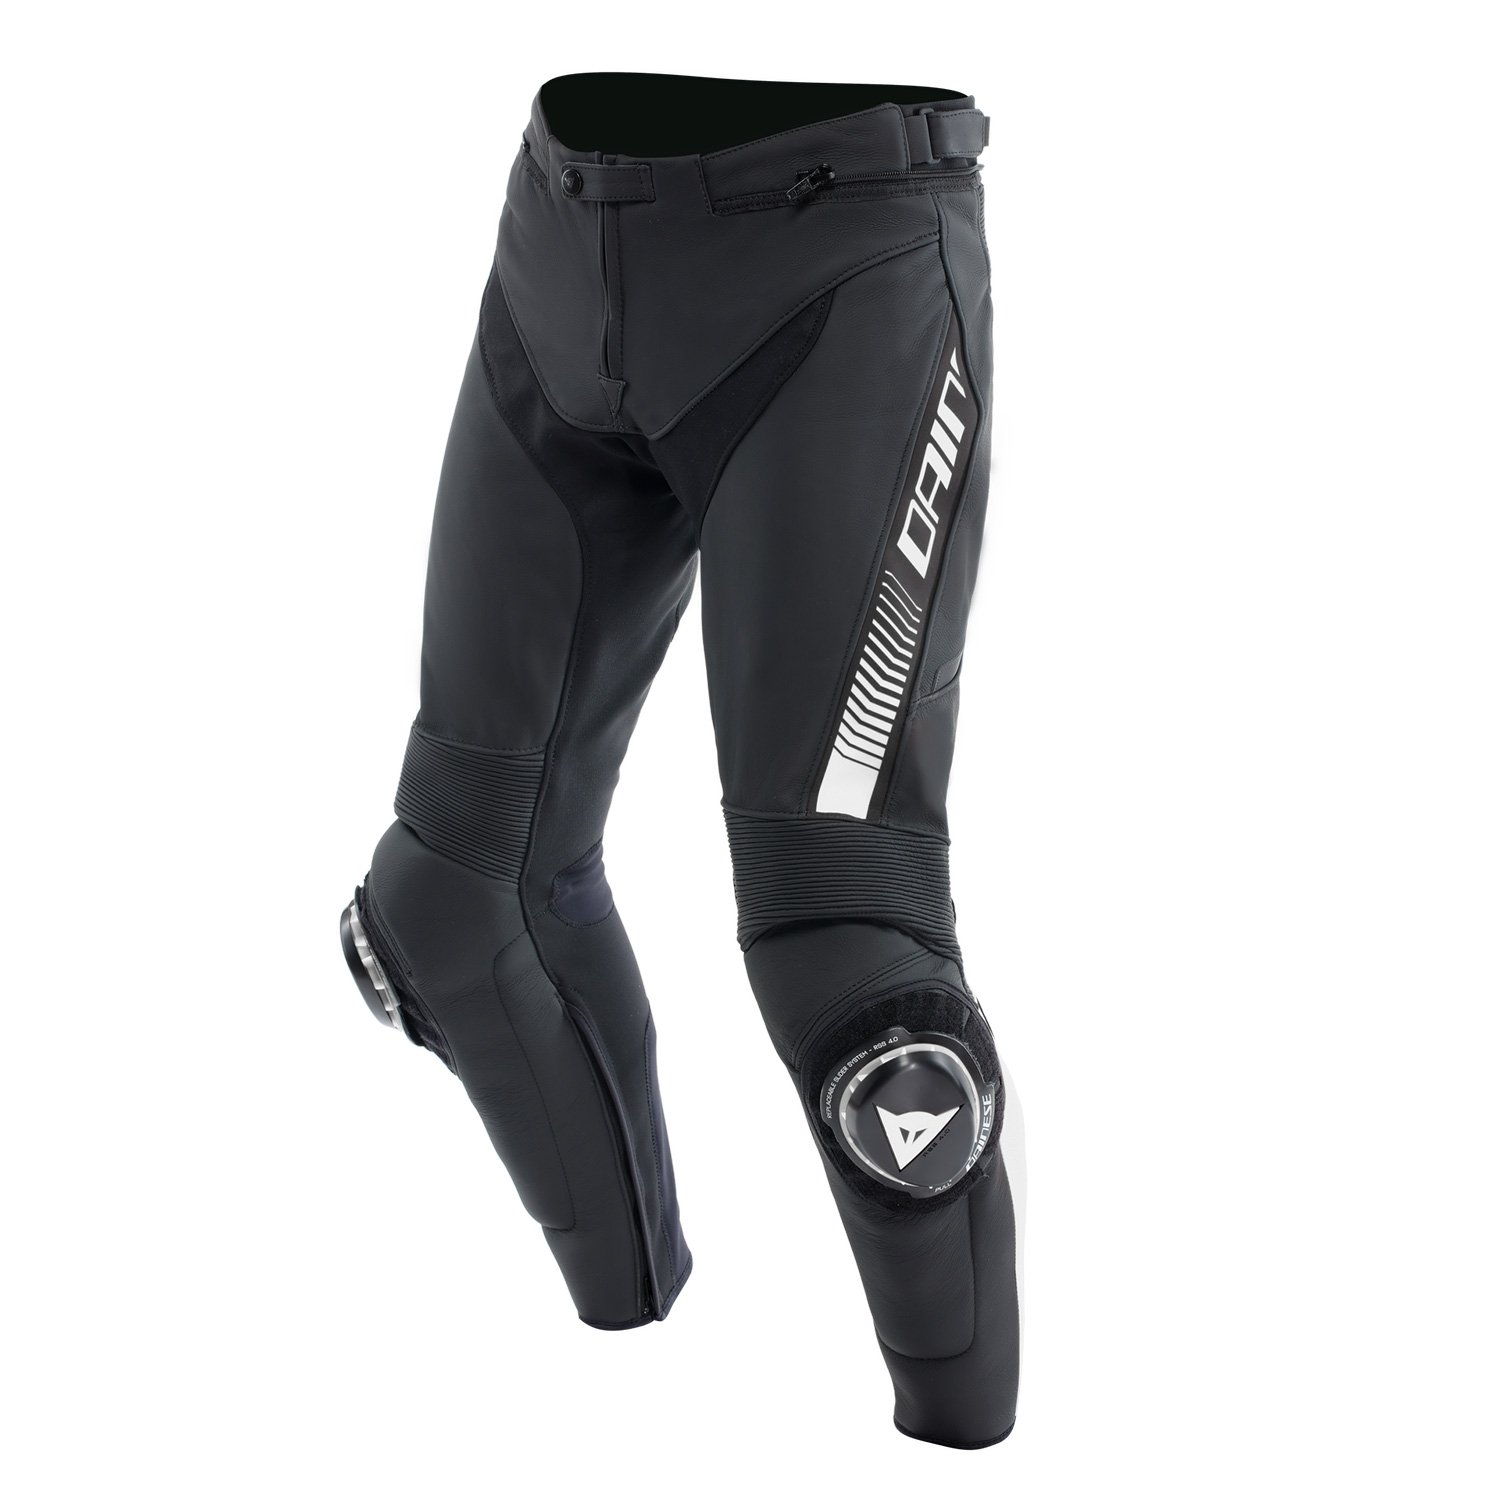 Image of Dainese Super Speed Leather Pants Black White Talla 44